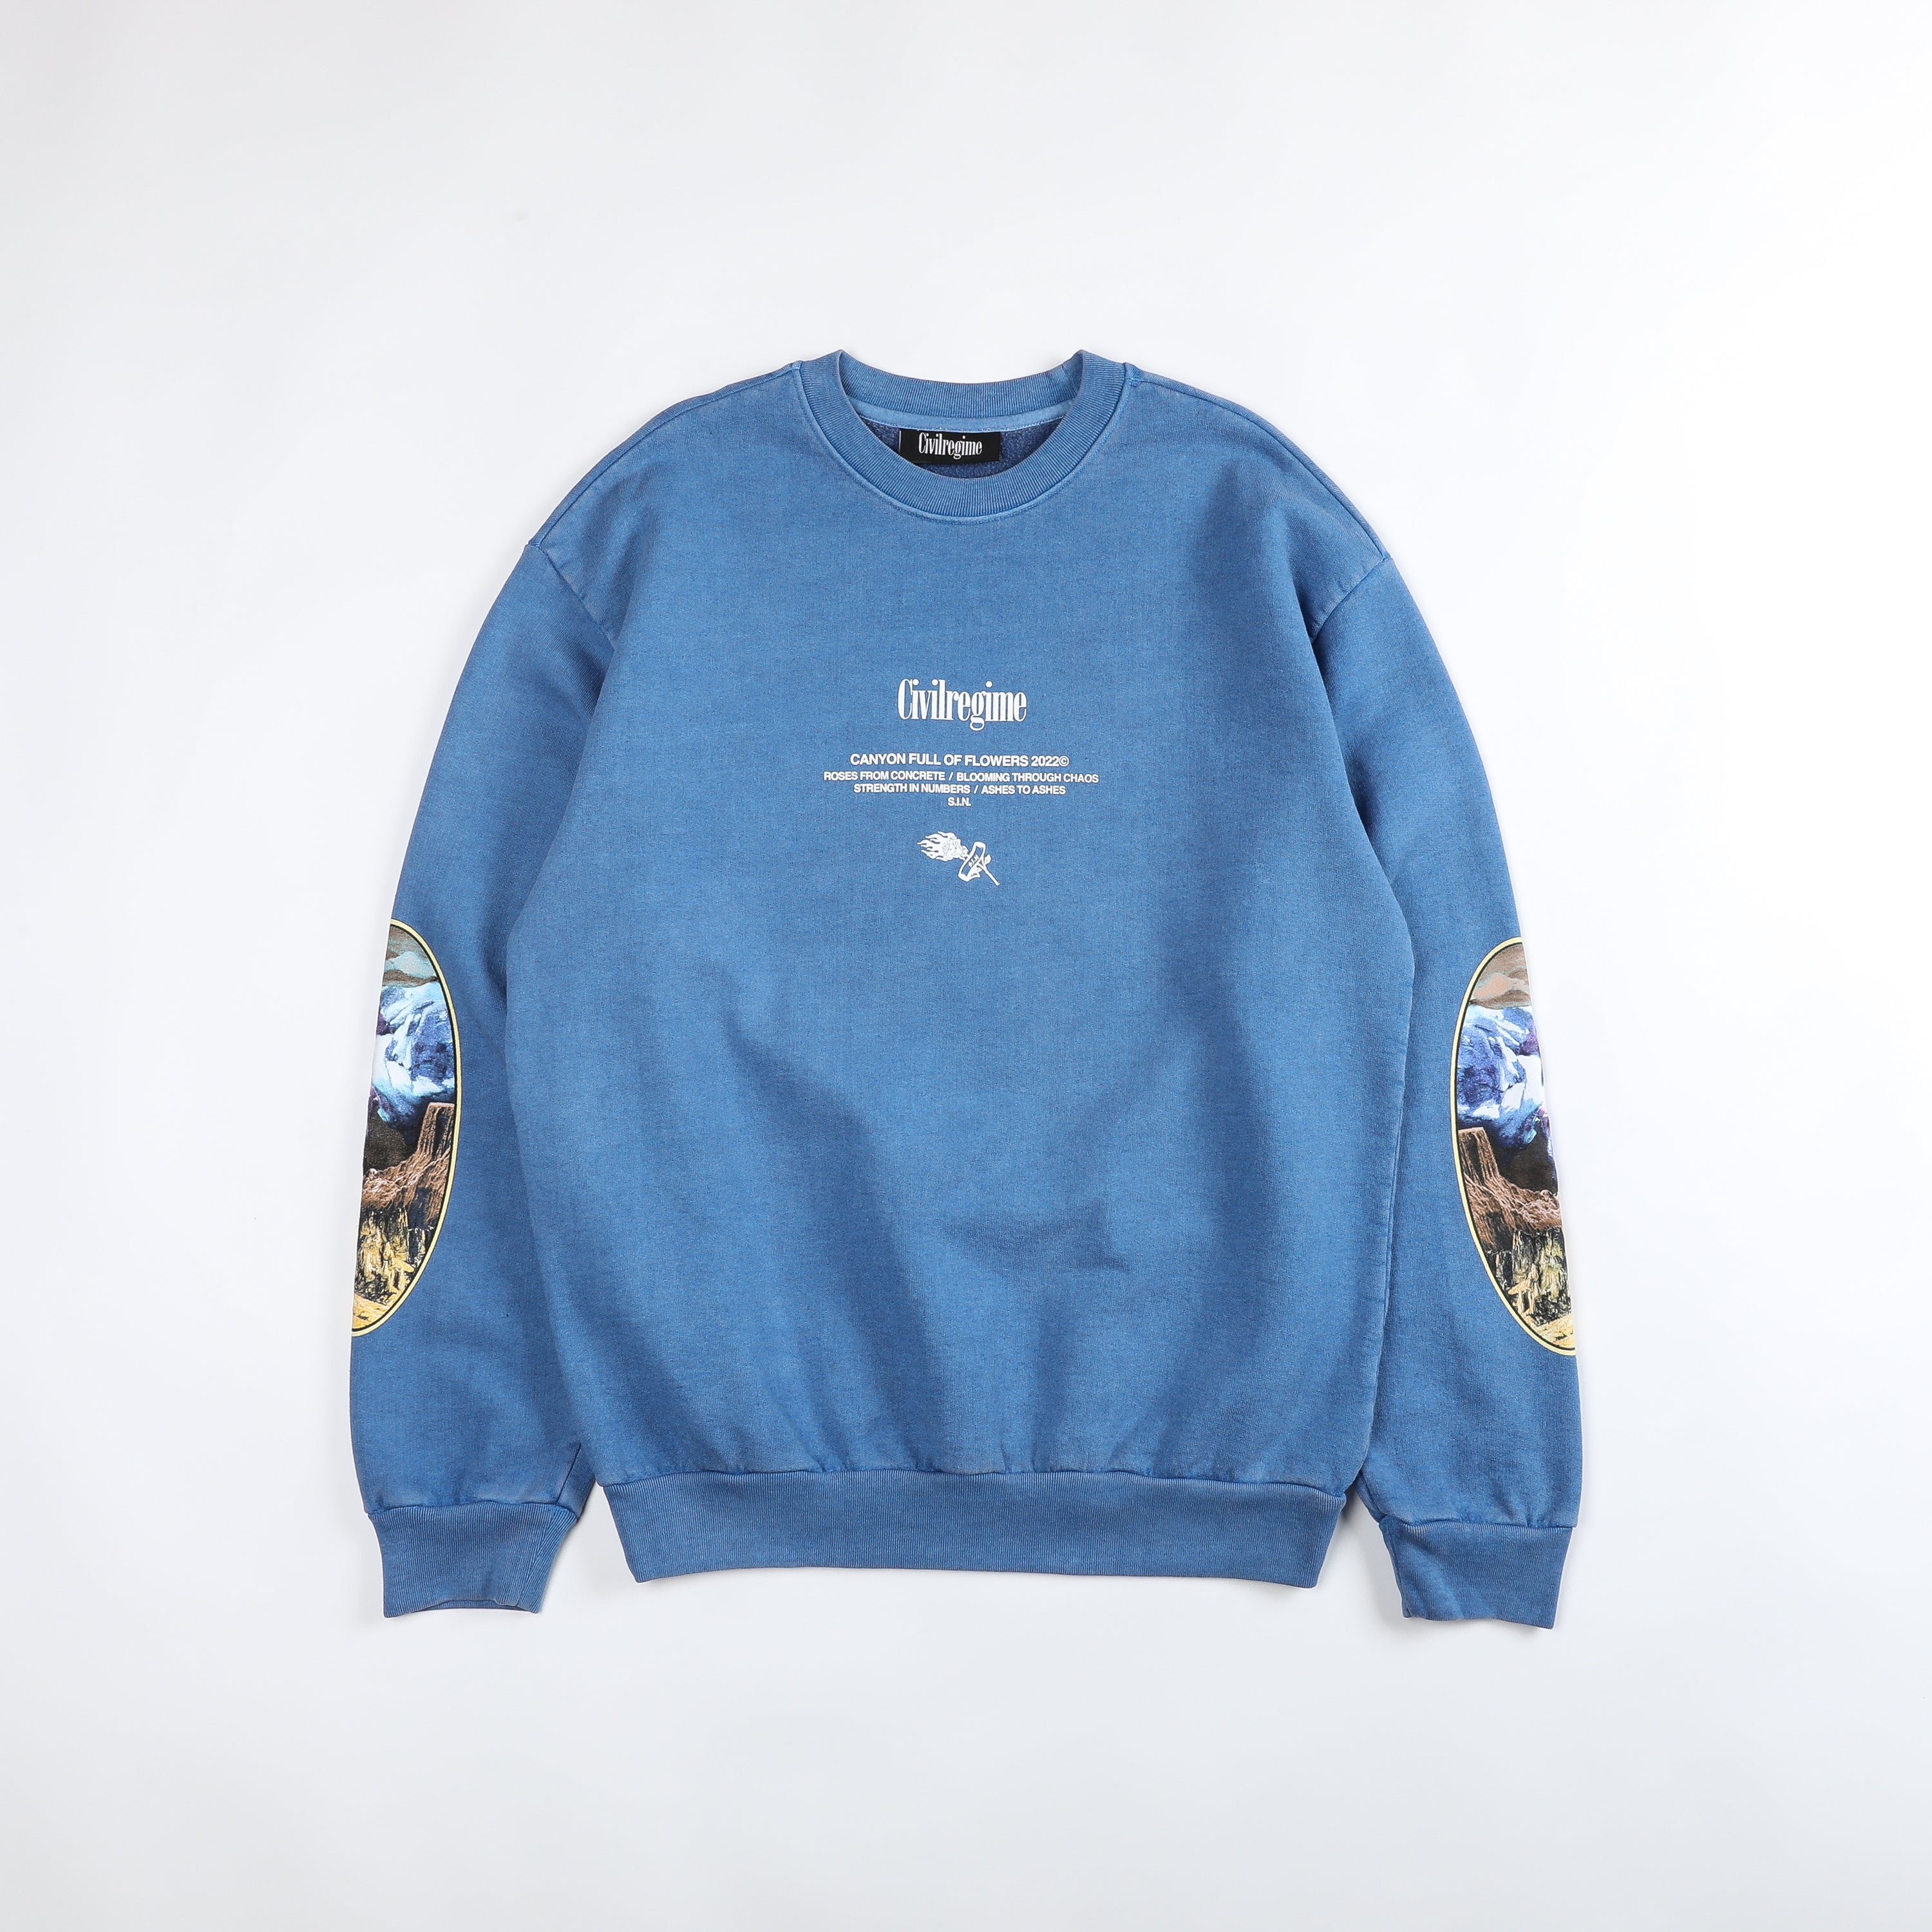 Image of Mystic Canyon All Day Crewneck in Vintage Indigo Blue i i i e, T e m I T e T s 